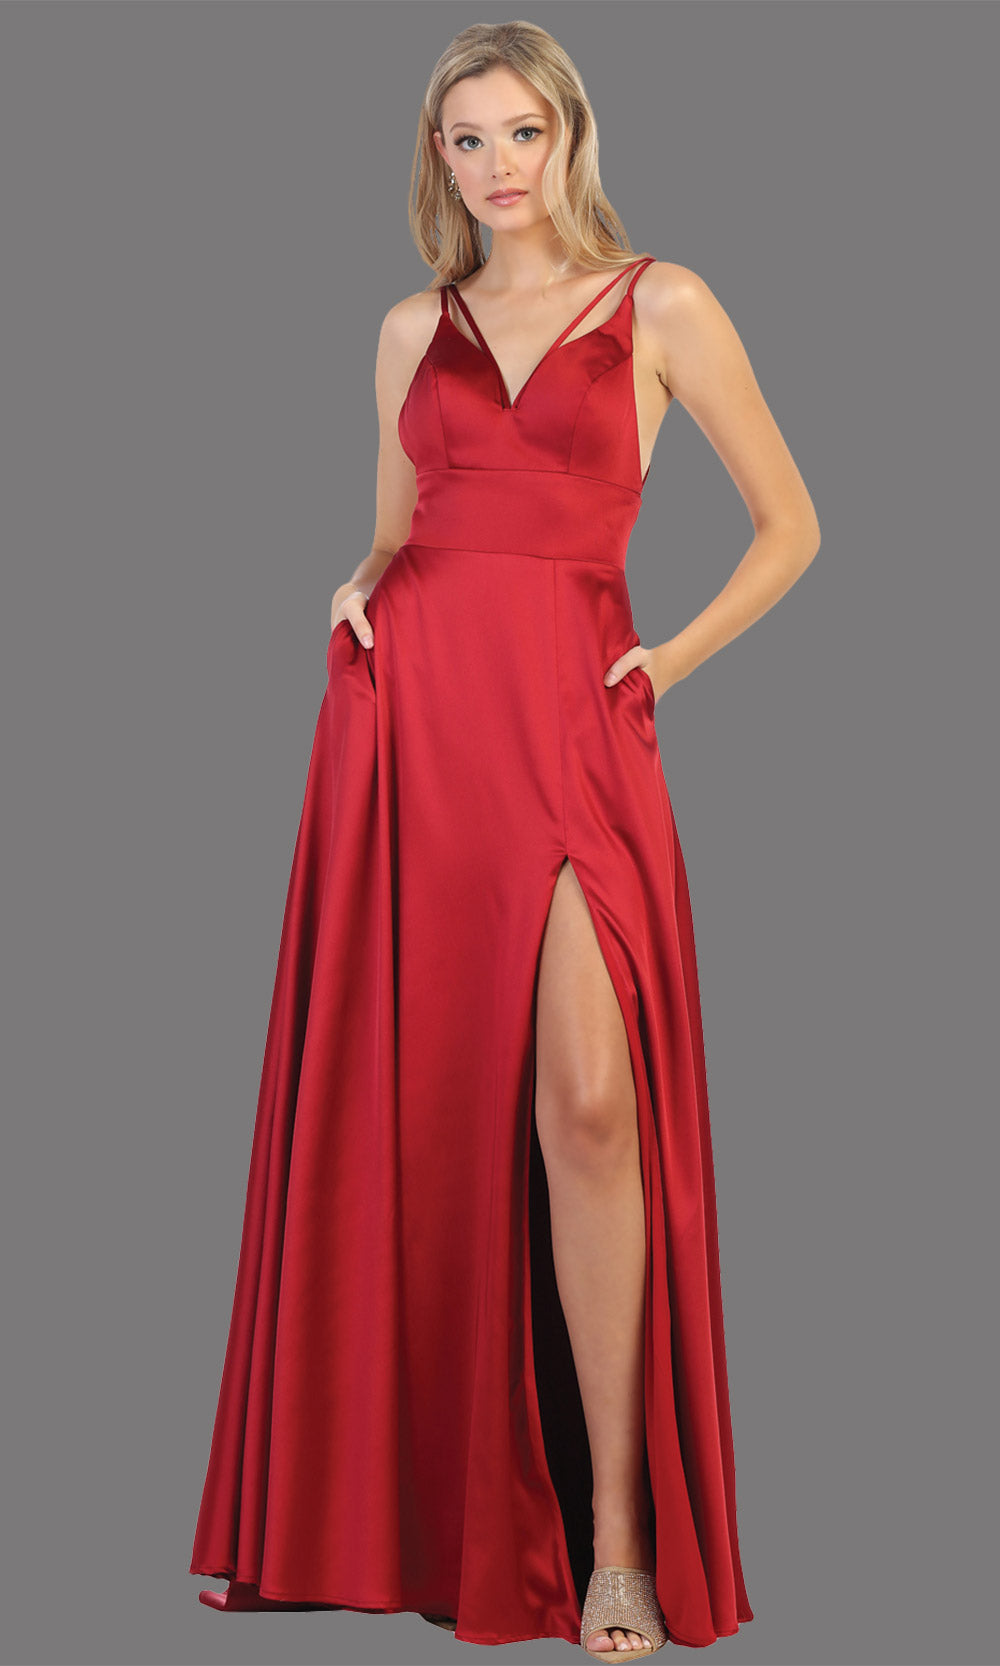 Mayqueen MQ1705 long burgundy red flowy satin dress with high slit and straps. This dark red dress is perfect for bridesmaid dresses, simple wedding guest dress, prom dress, gala, black tie wedding. Plus sizes are available, evening party dress.jpg